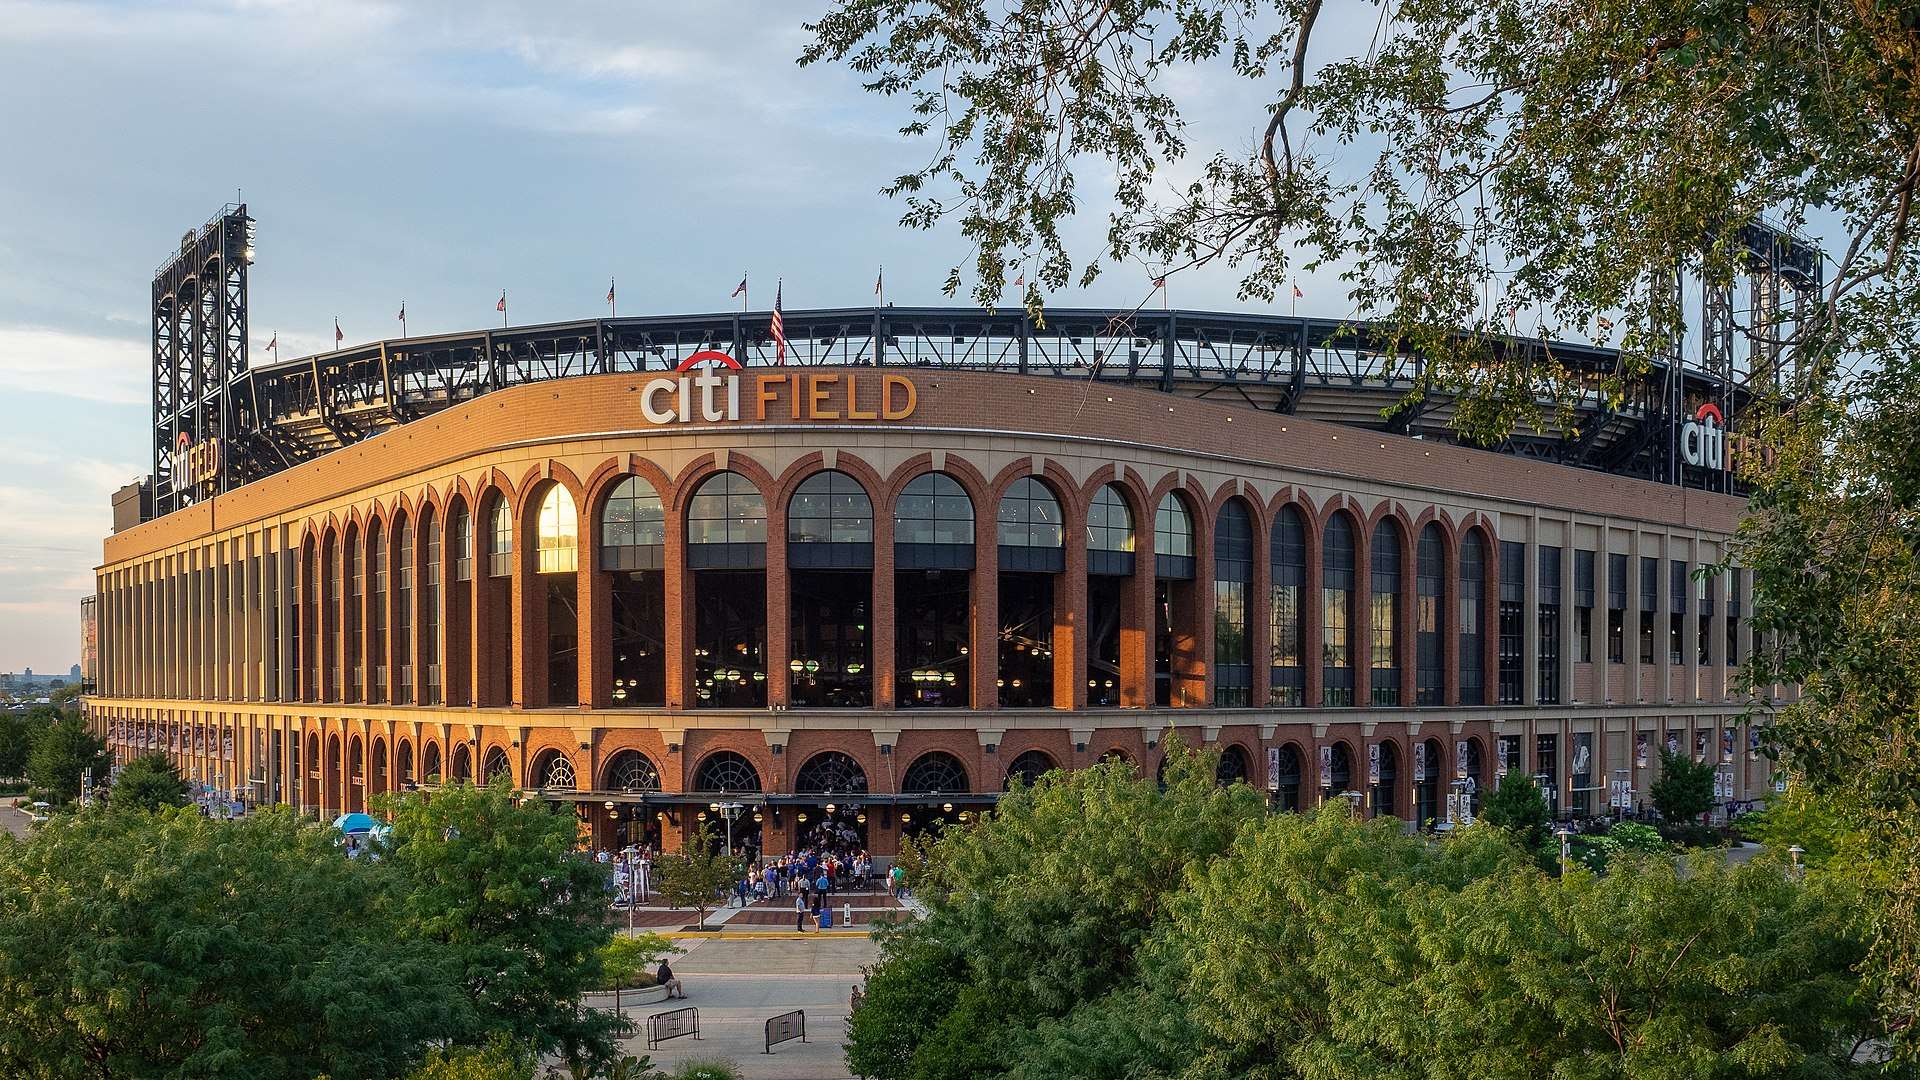 By Ajay Suresh from New York, NY, USA - Citi Field, CC BY 2.0, https://commons.wikimedia.org/w/index.php?curid=81588411